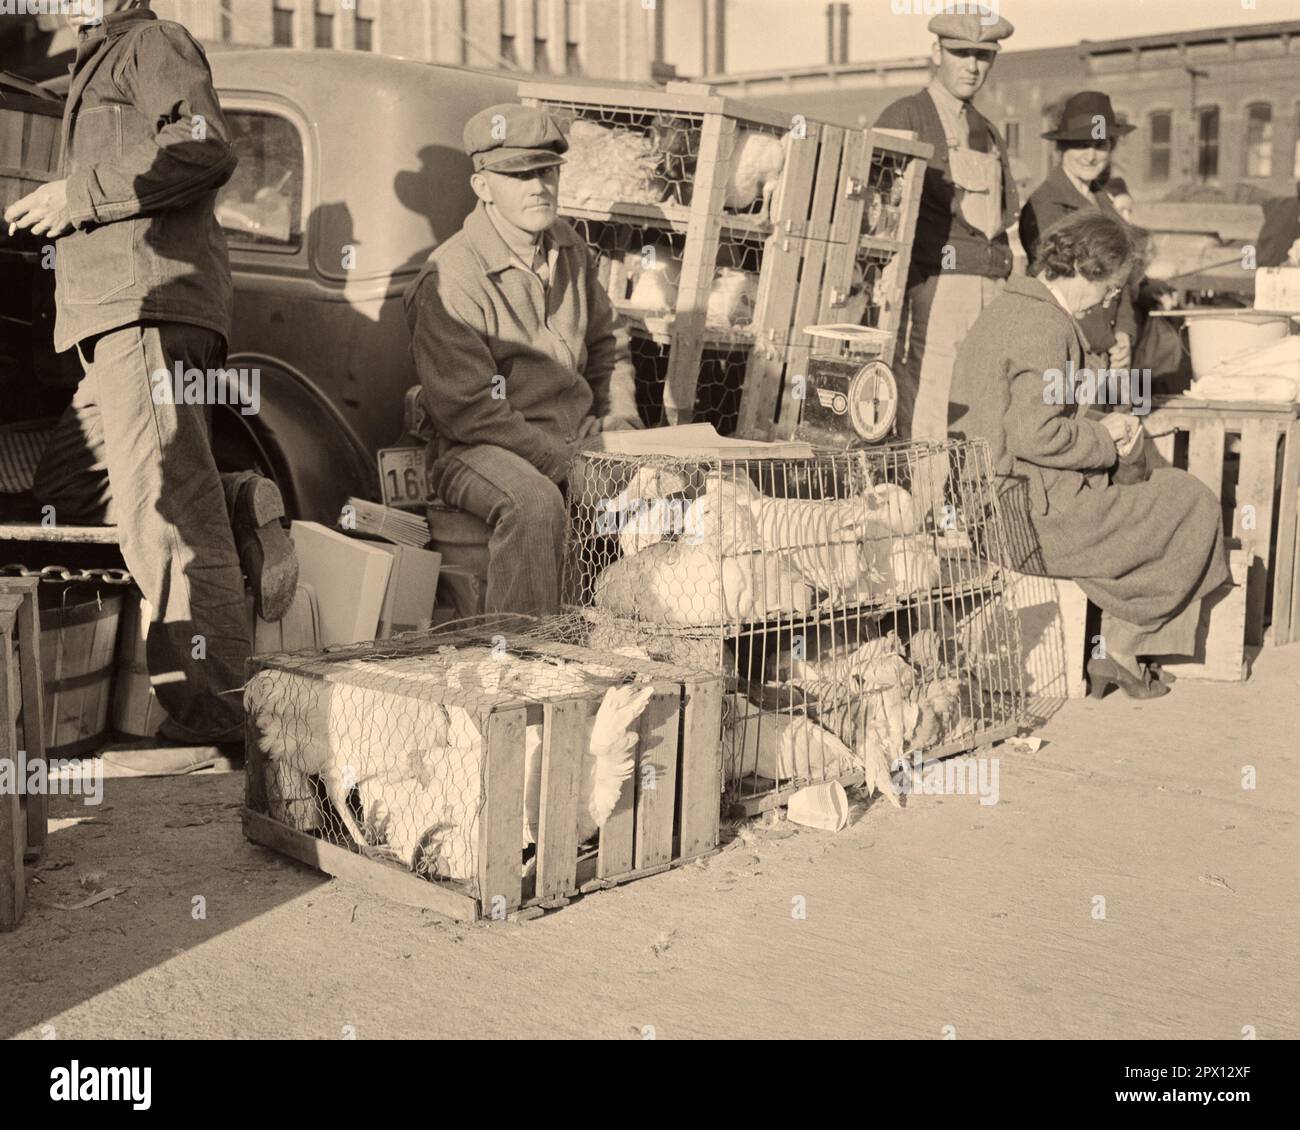 1930s ANONYMOUS FARMER SELLING LIVE DUCKS AND CHICKENS AT ROADSIDE MARKET IN KANSAS CITY MISSOURI USA - m697 HAR001 HARS POULTRY RECESSION ROADSIDE UNEMPLOYMENT WORLDWIDE BLACK AND WHITE CAUCASIAN ETHNICITY DOWNTURN HAR001 MIDWEST MIDWESTERN OLD FASHIONED Stock Photo